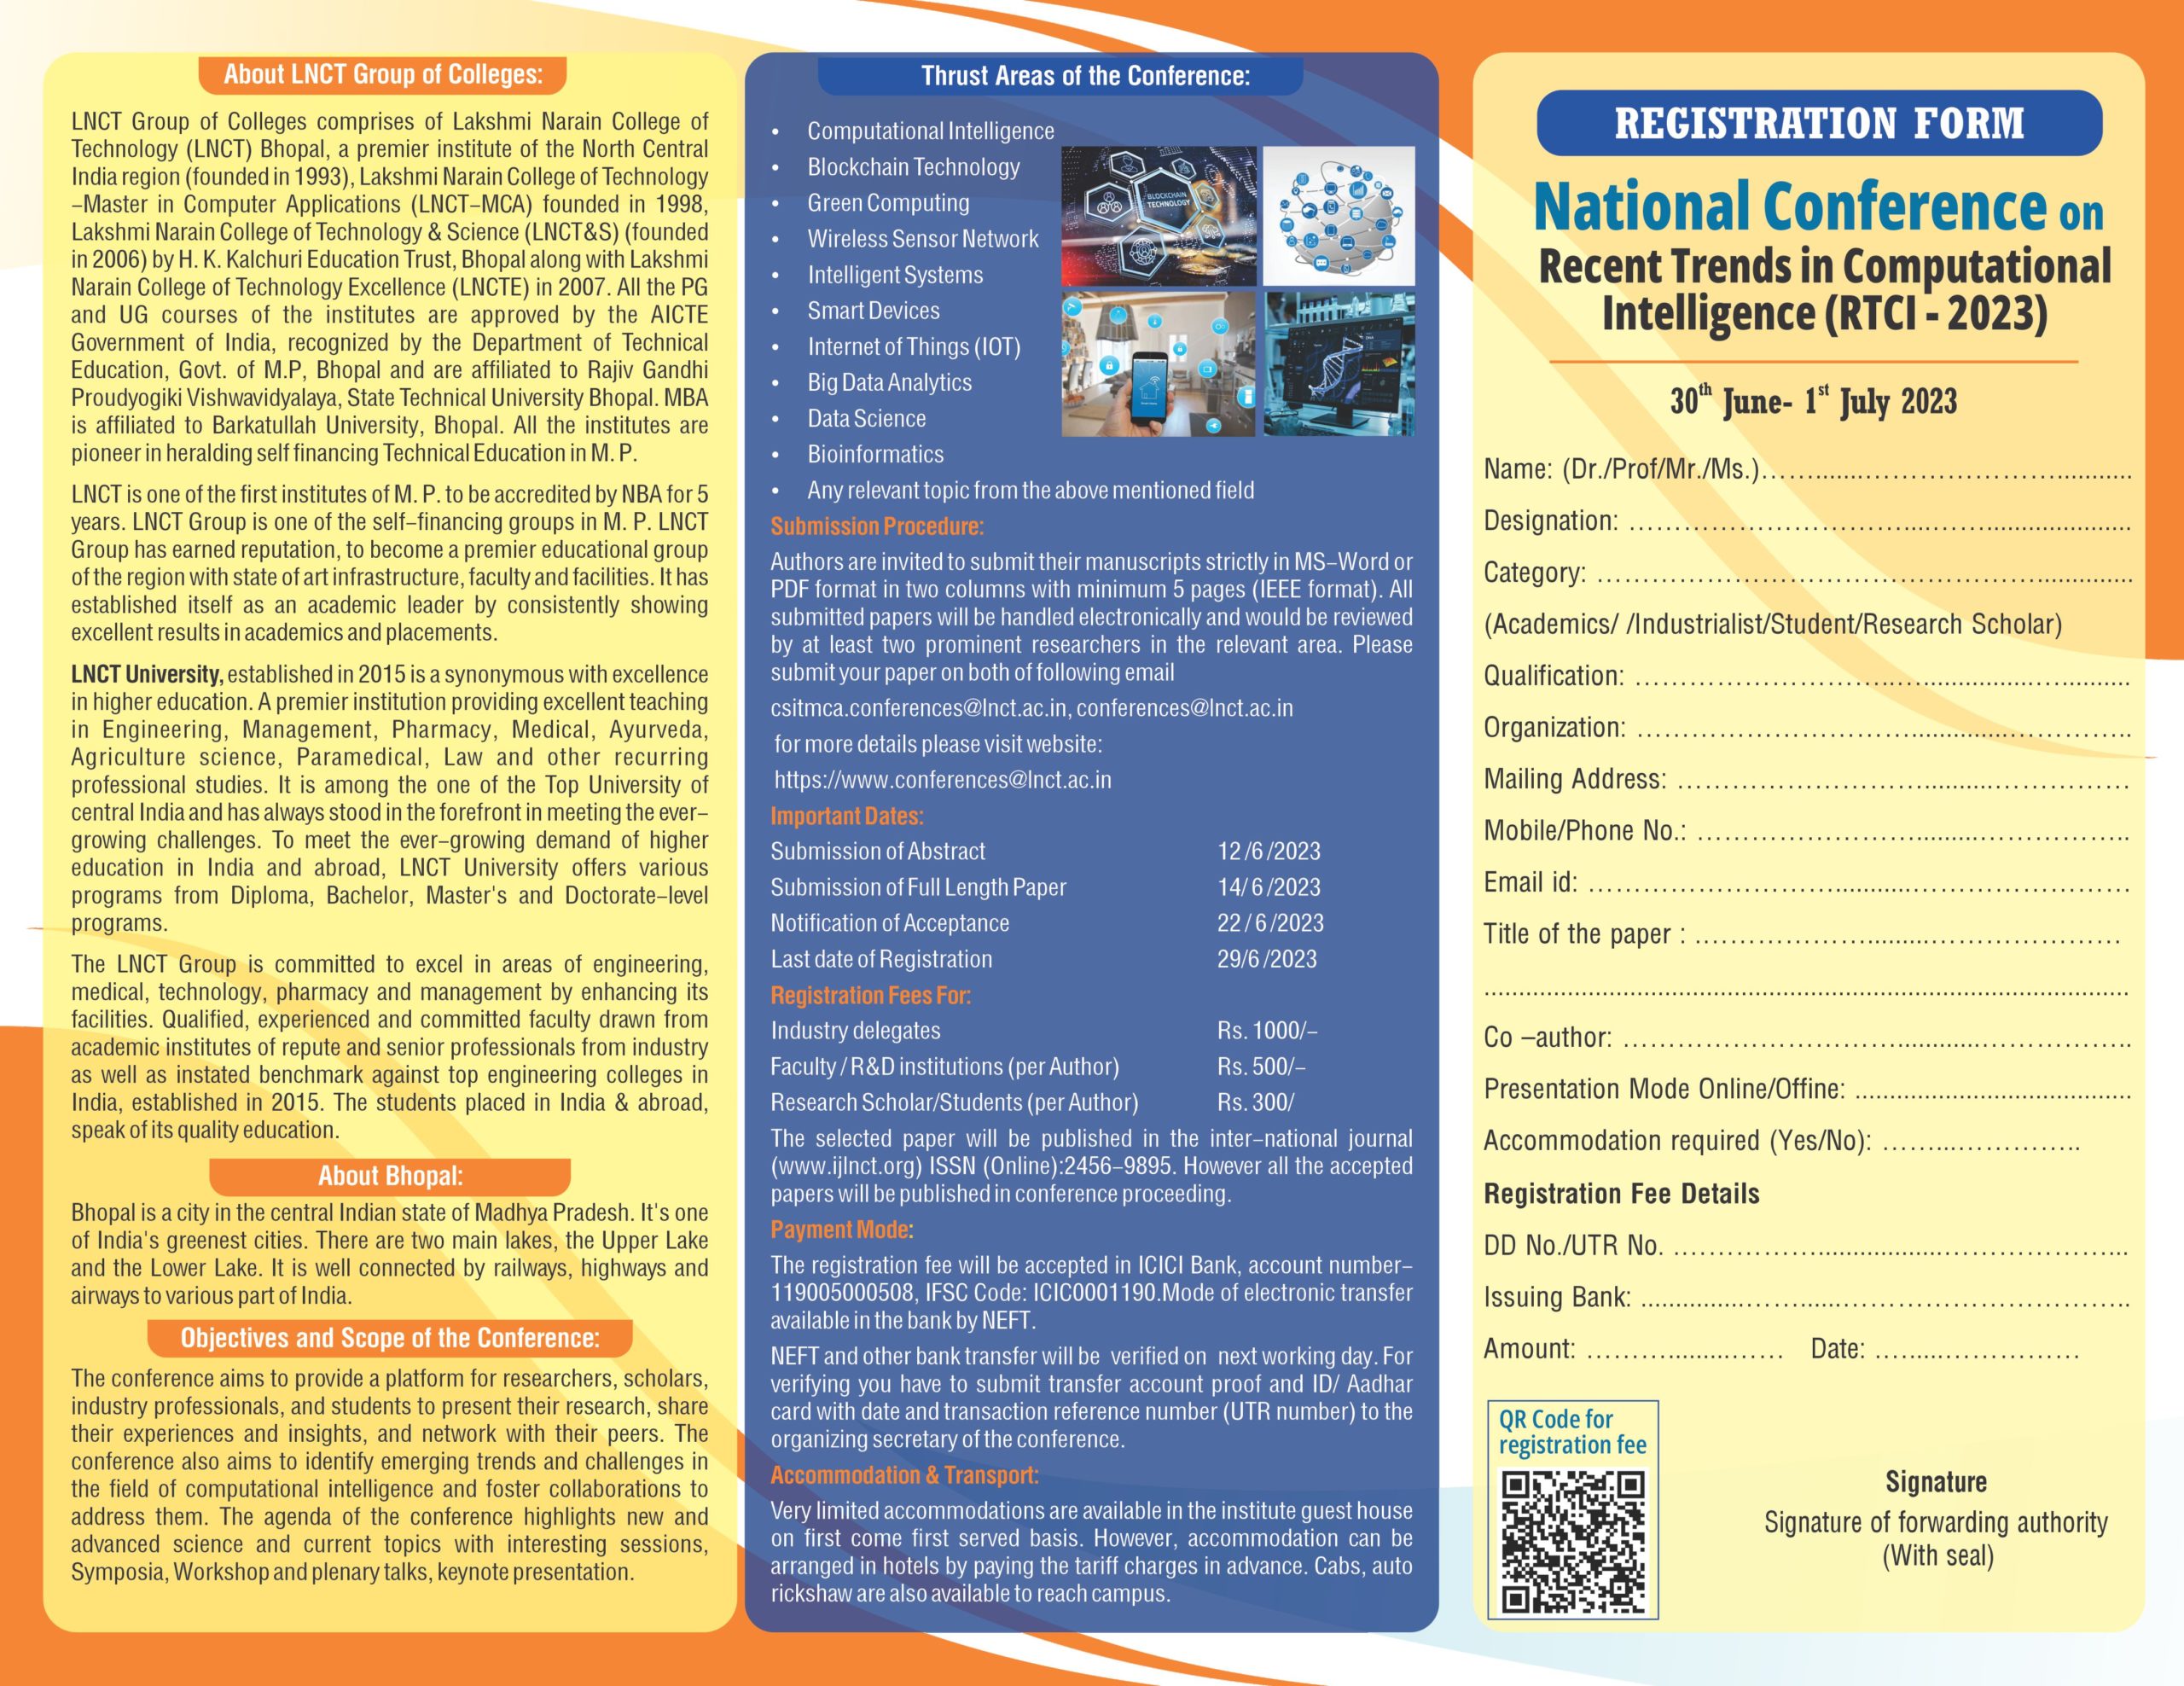 National Conference on Recent Trends in Computational Intelligence 1